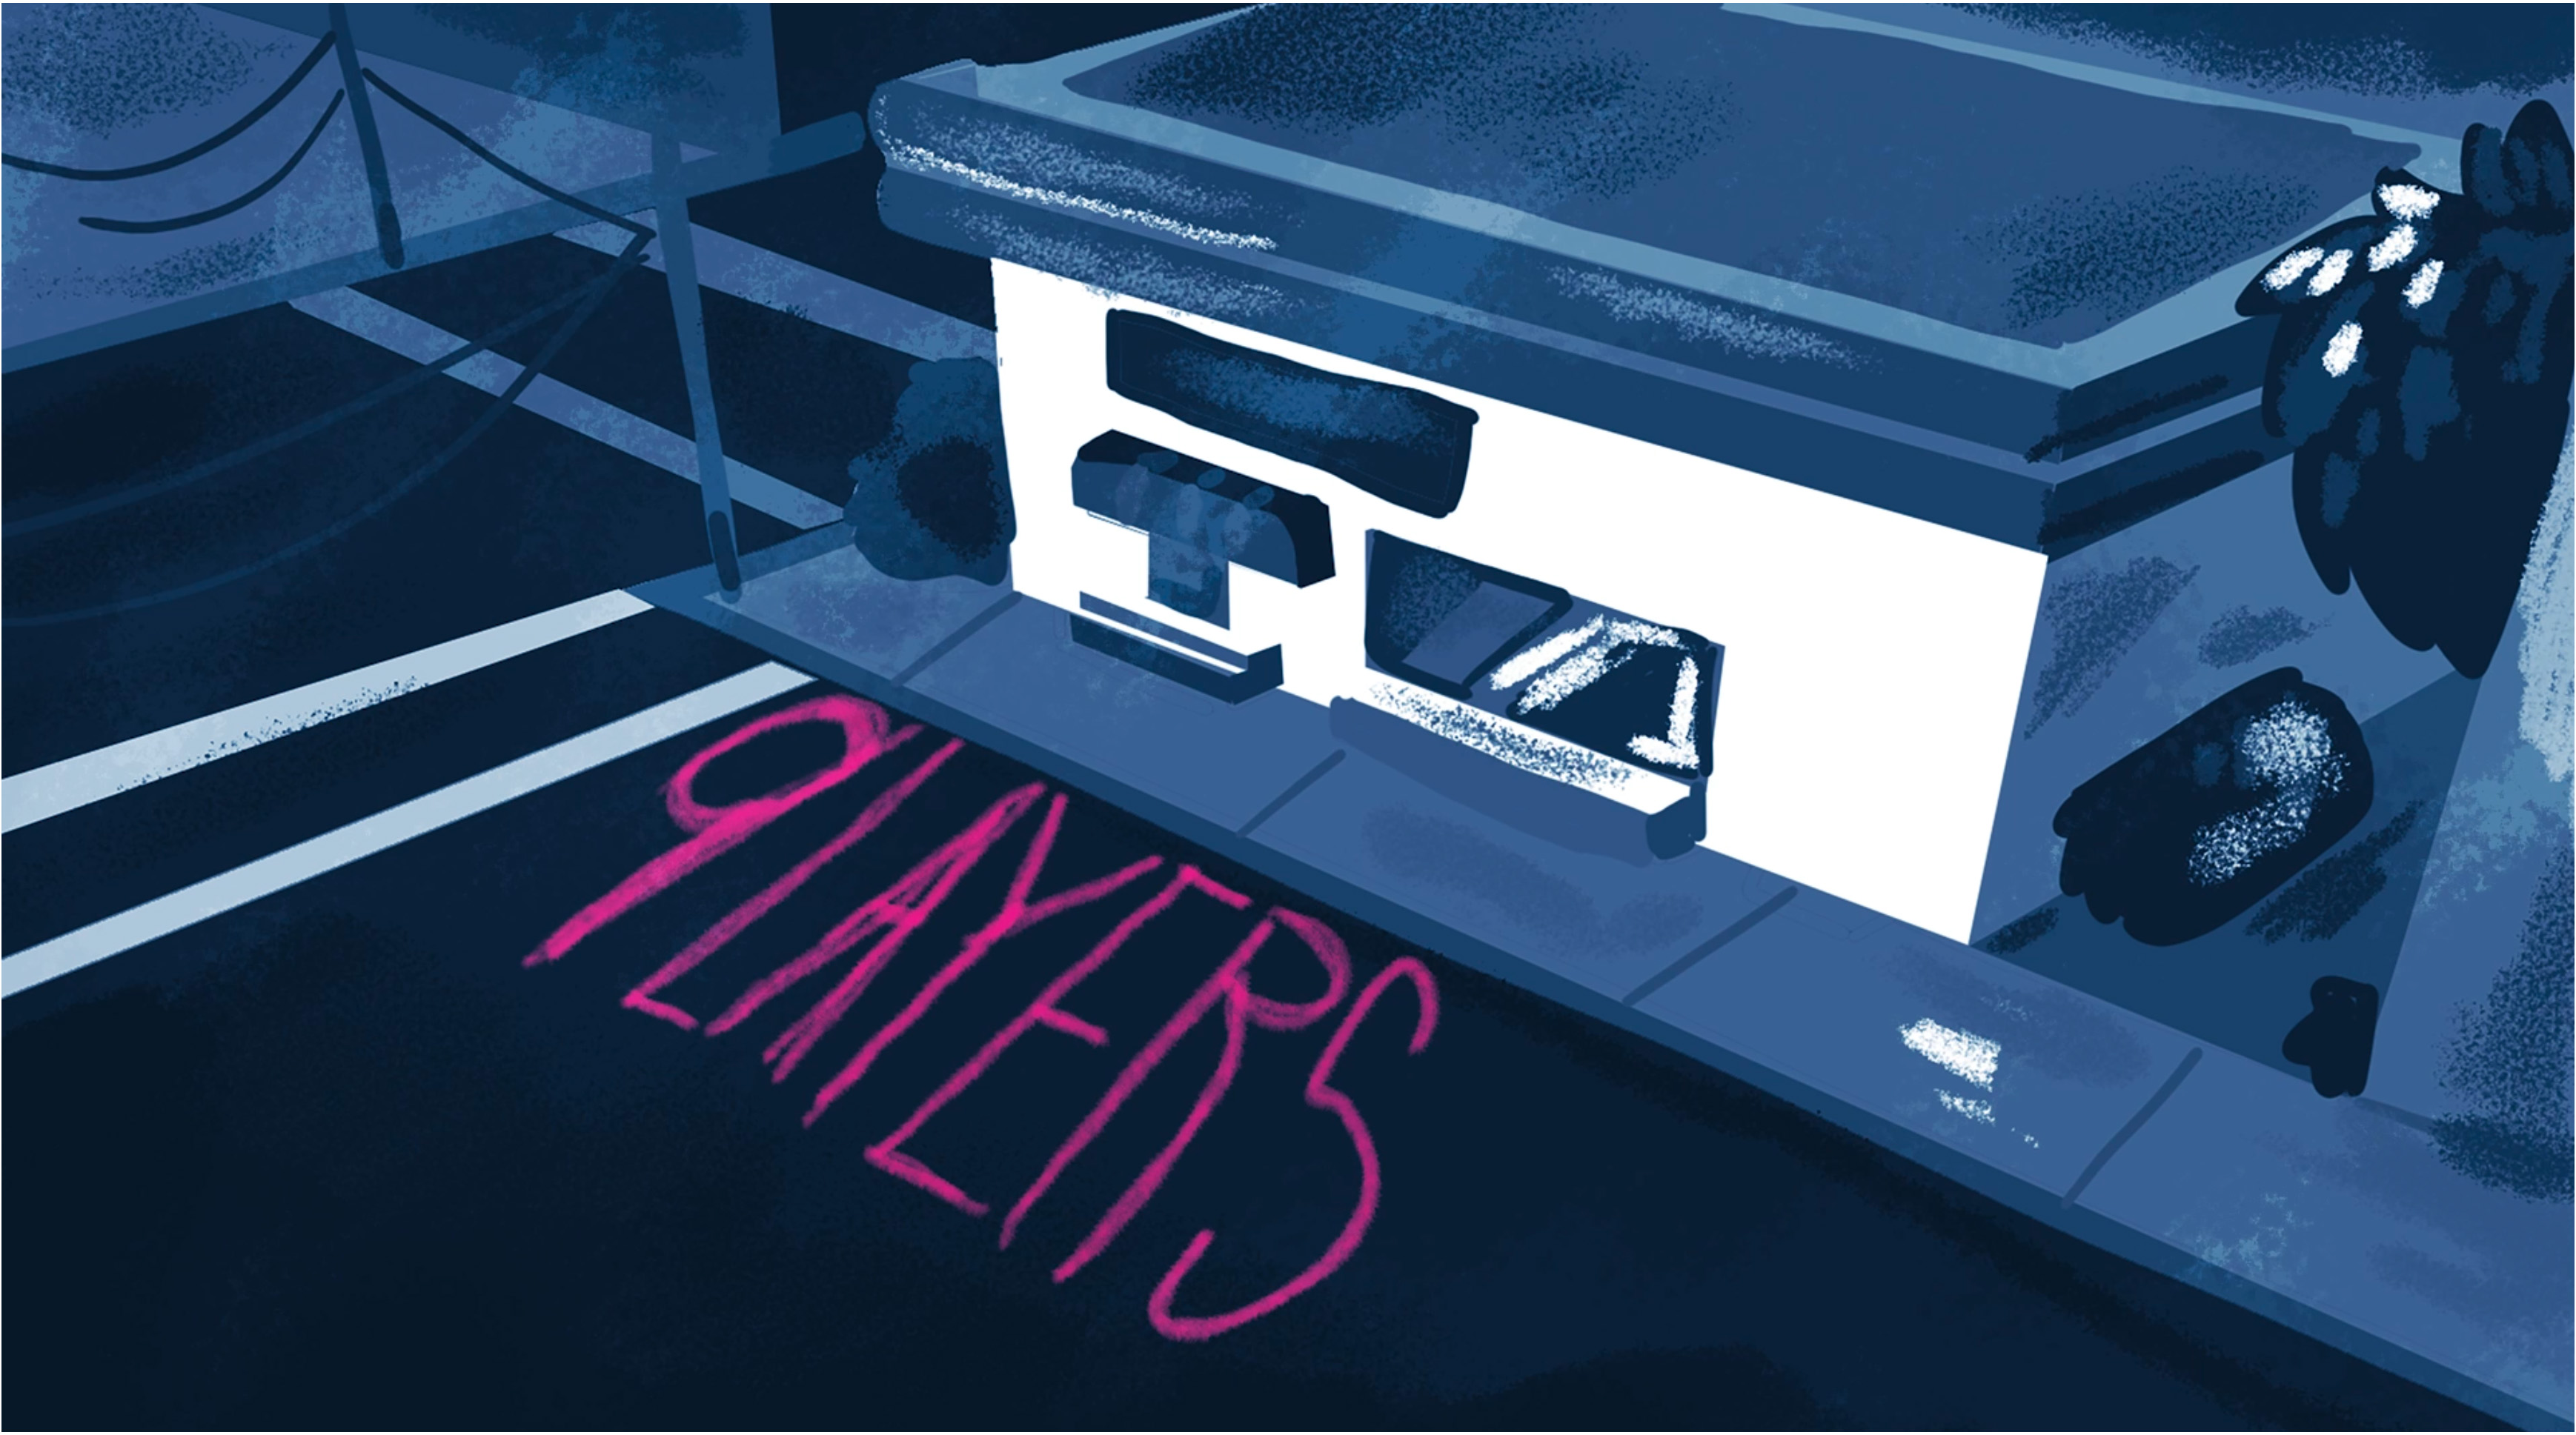  / Still from the Animated File "9 Layers". A blue overhead shot of the Intro to the Film and the Title in Pink Lettering. Created using Photoshop, Adobe Premier Pro and ToonBoom Harmony